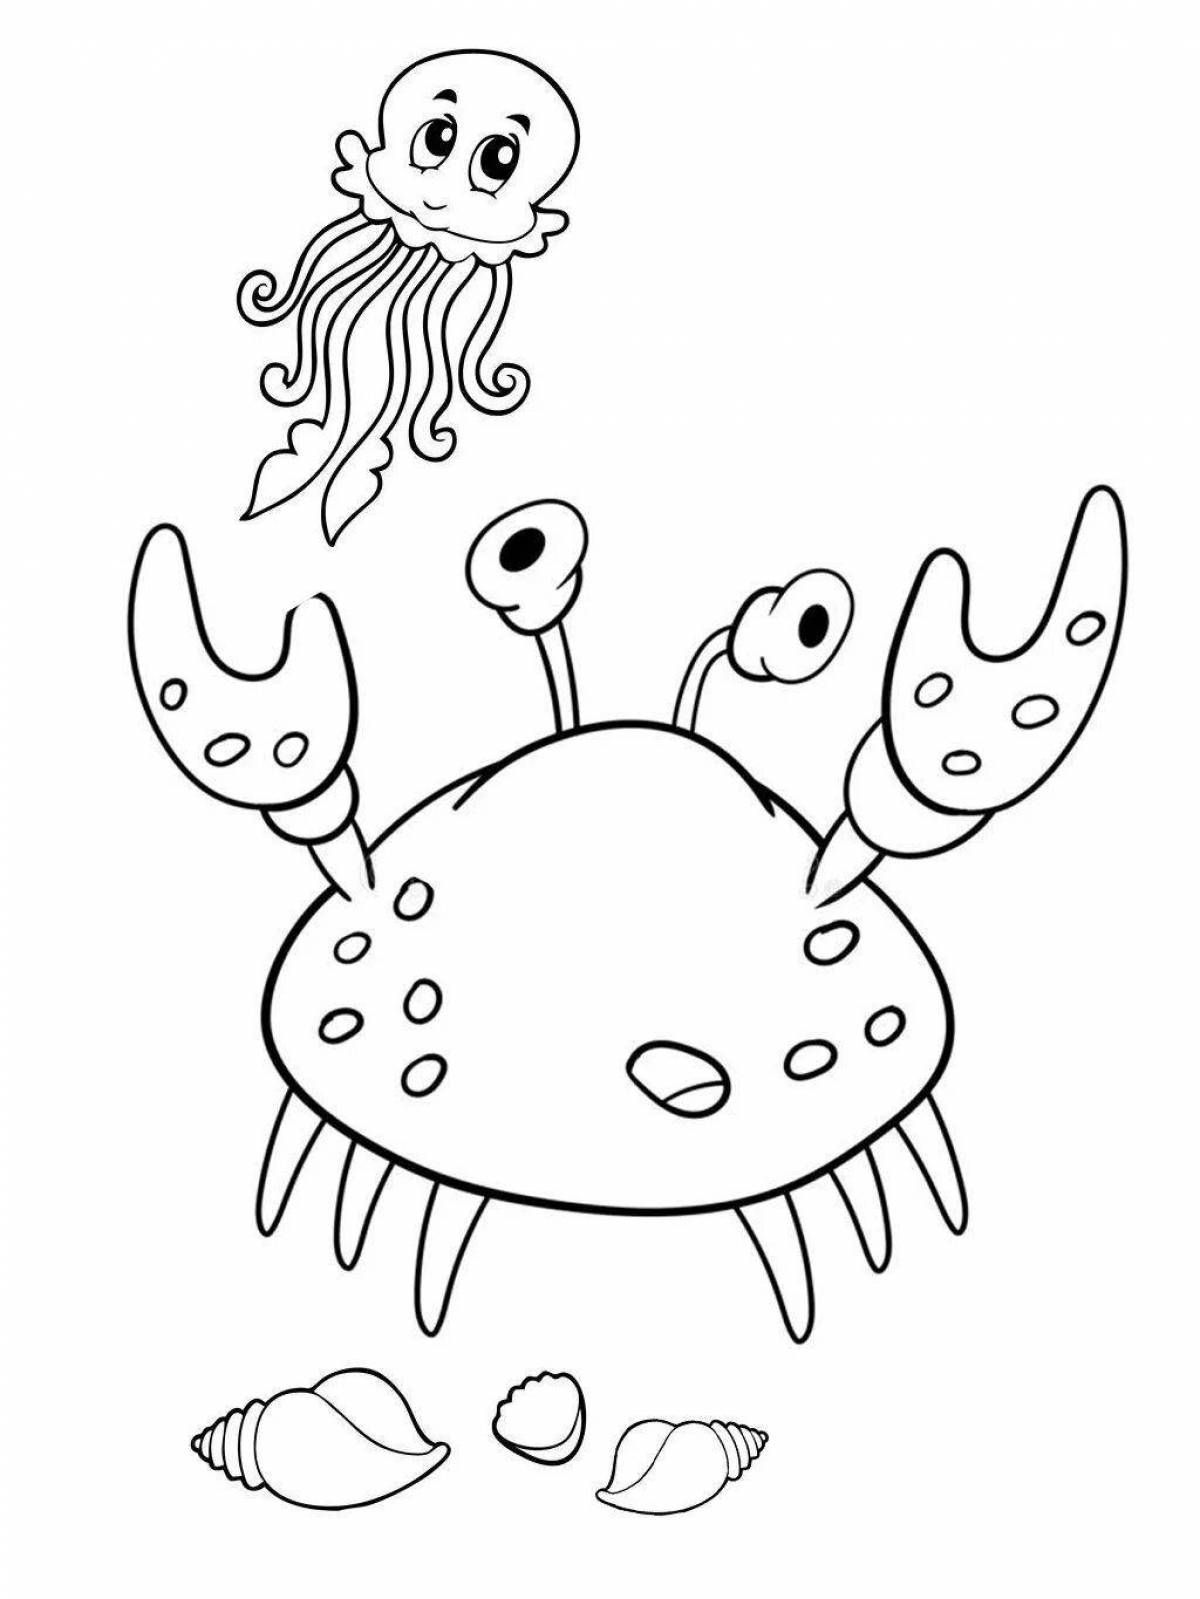 Captain Crab Coloring Page